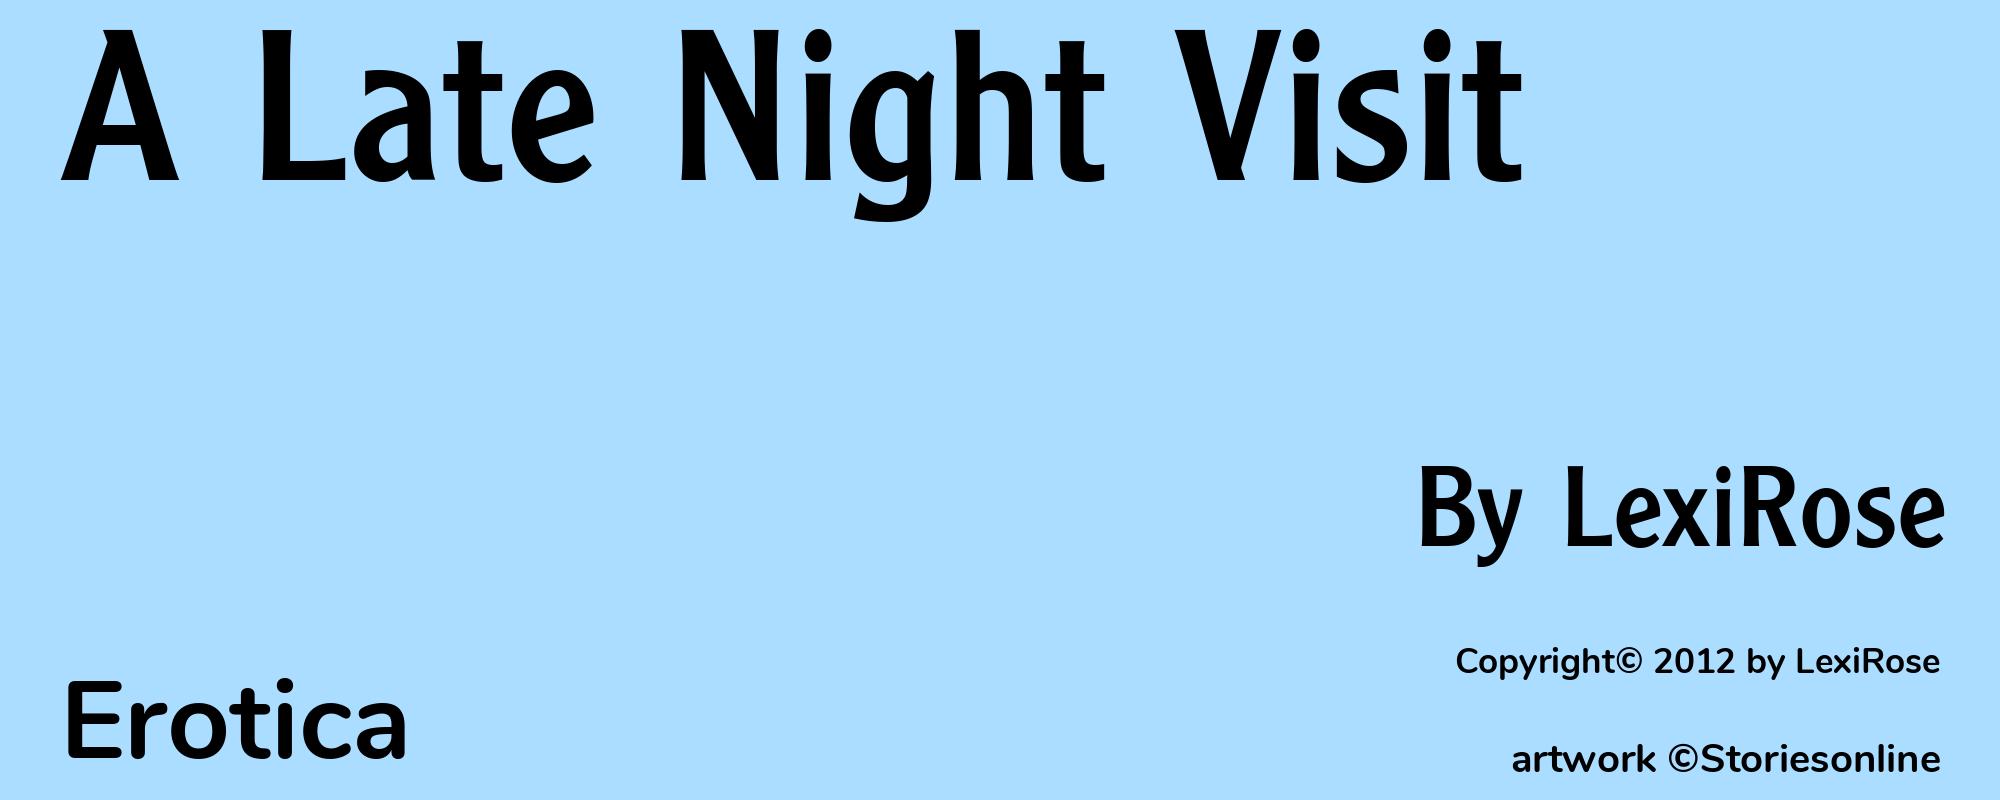 A Late Night Visit - Cover